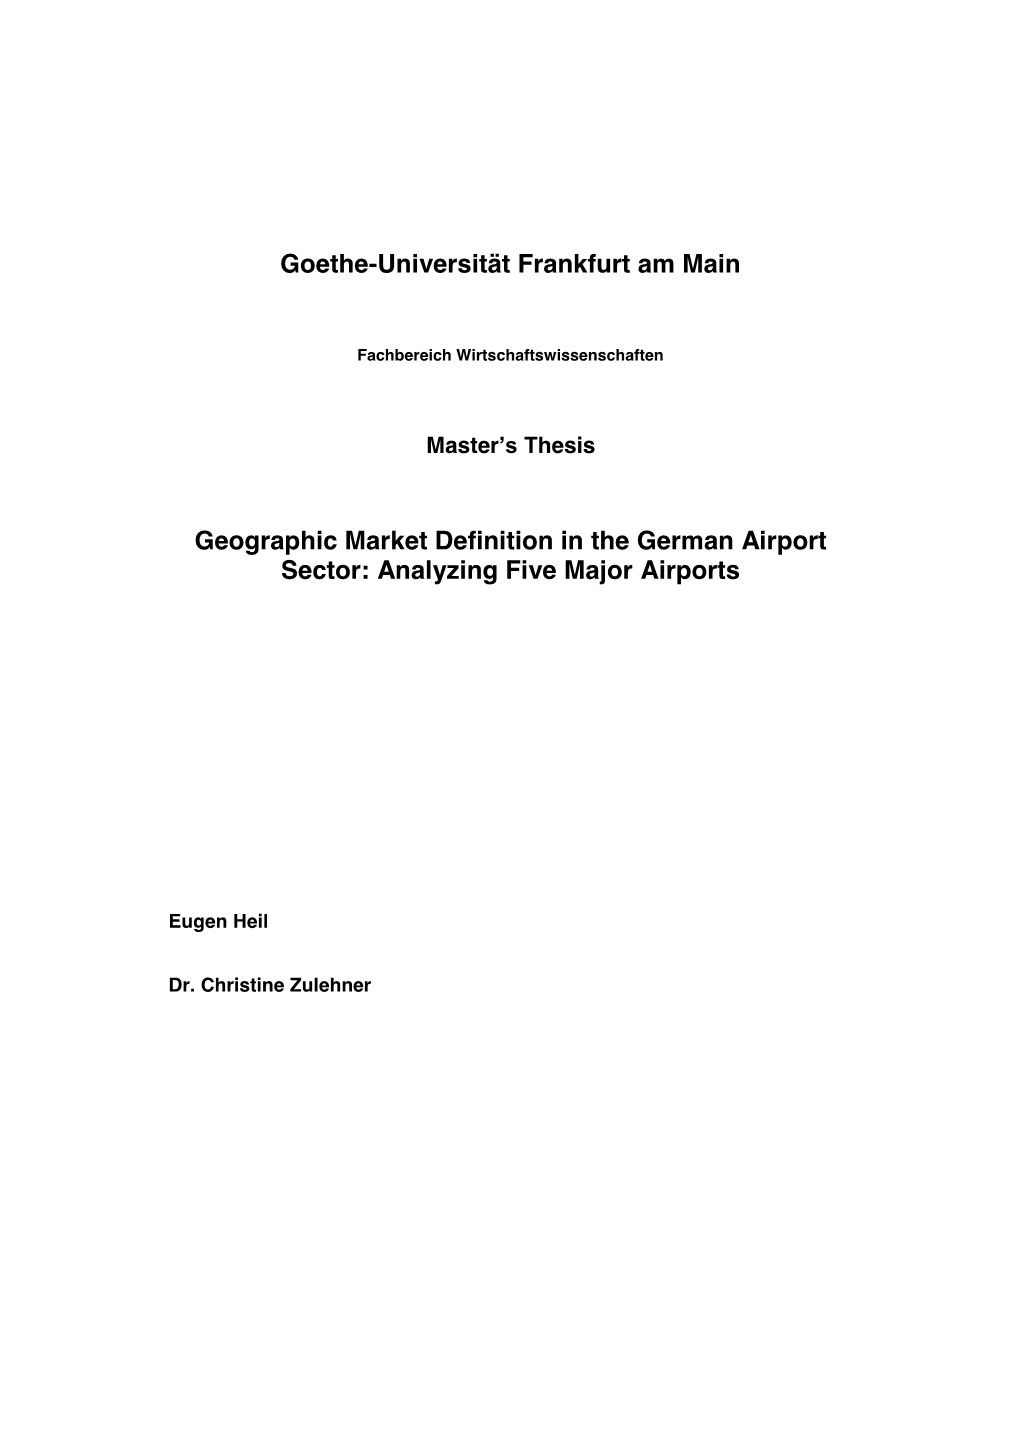 Geographic Market Definition in the German Airport Sector: Analyzing Five Major Airports